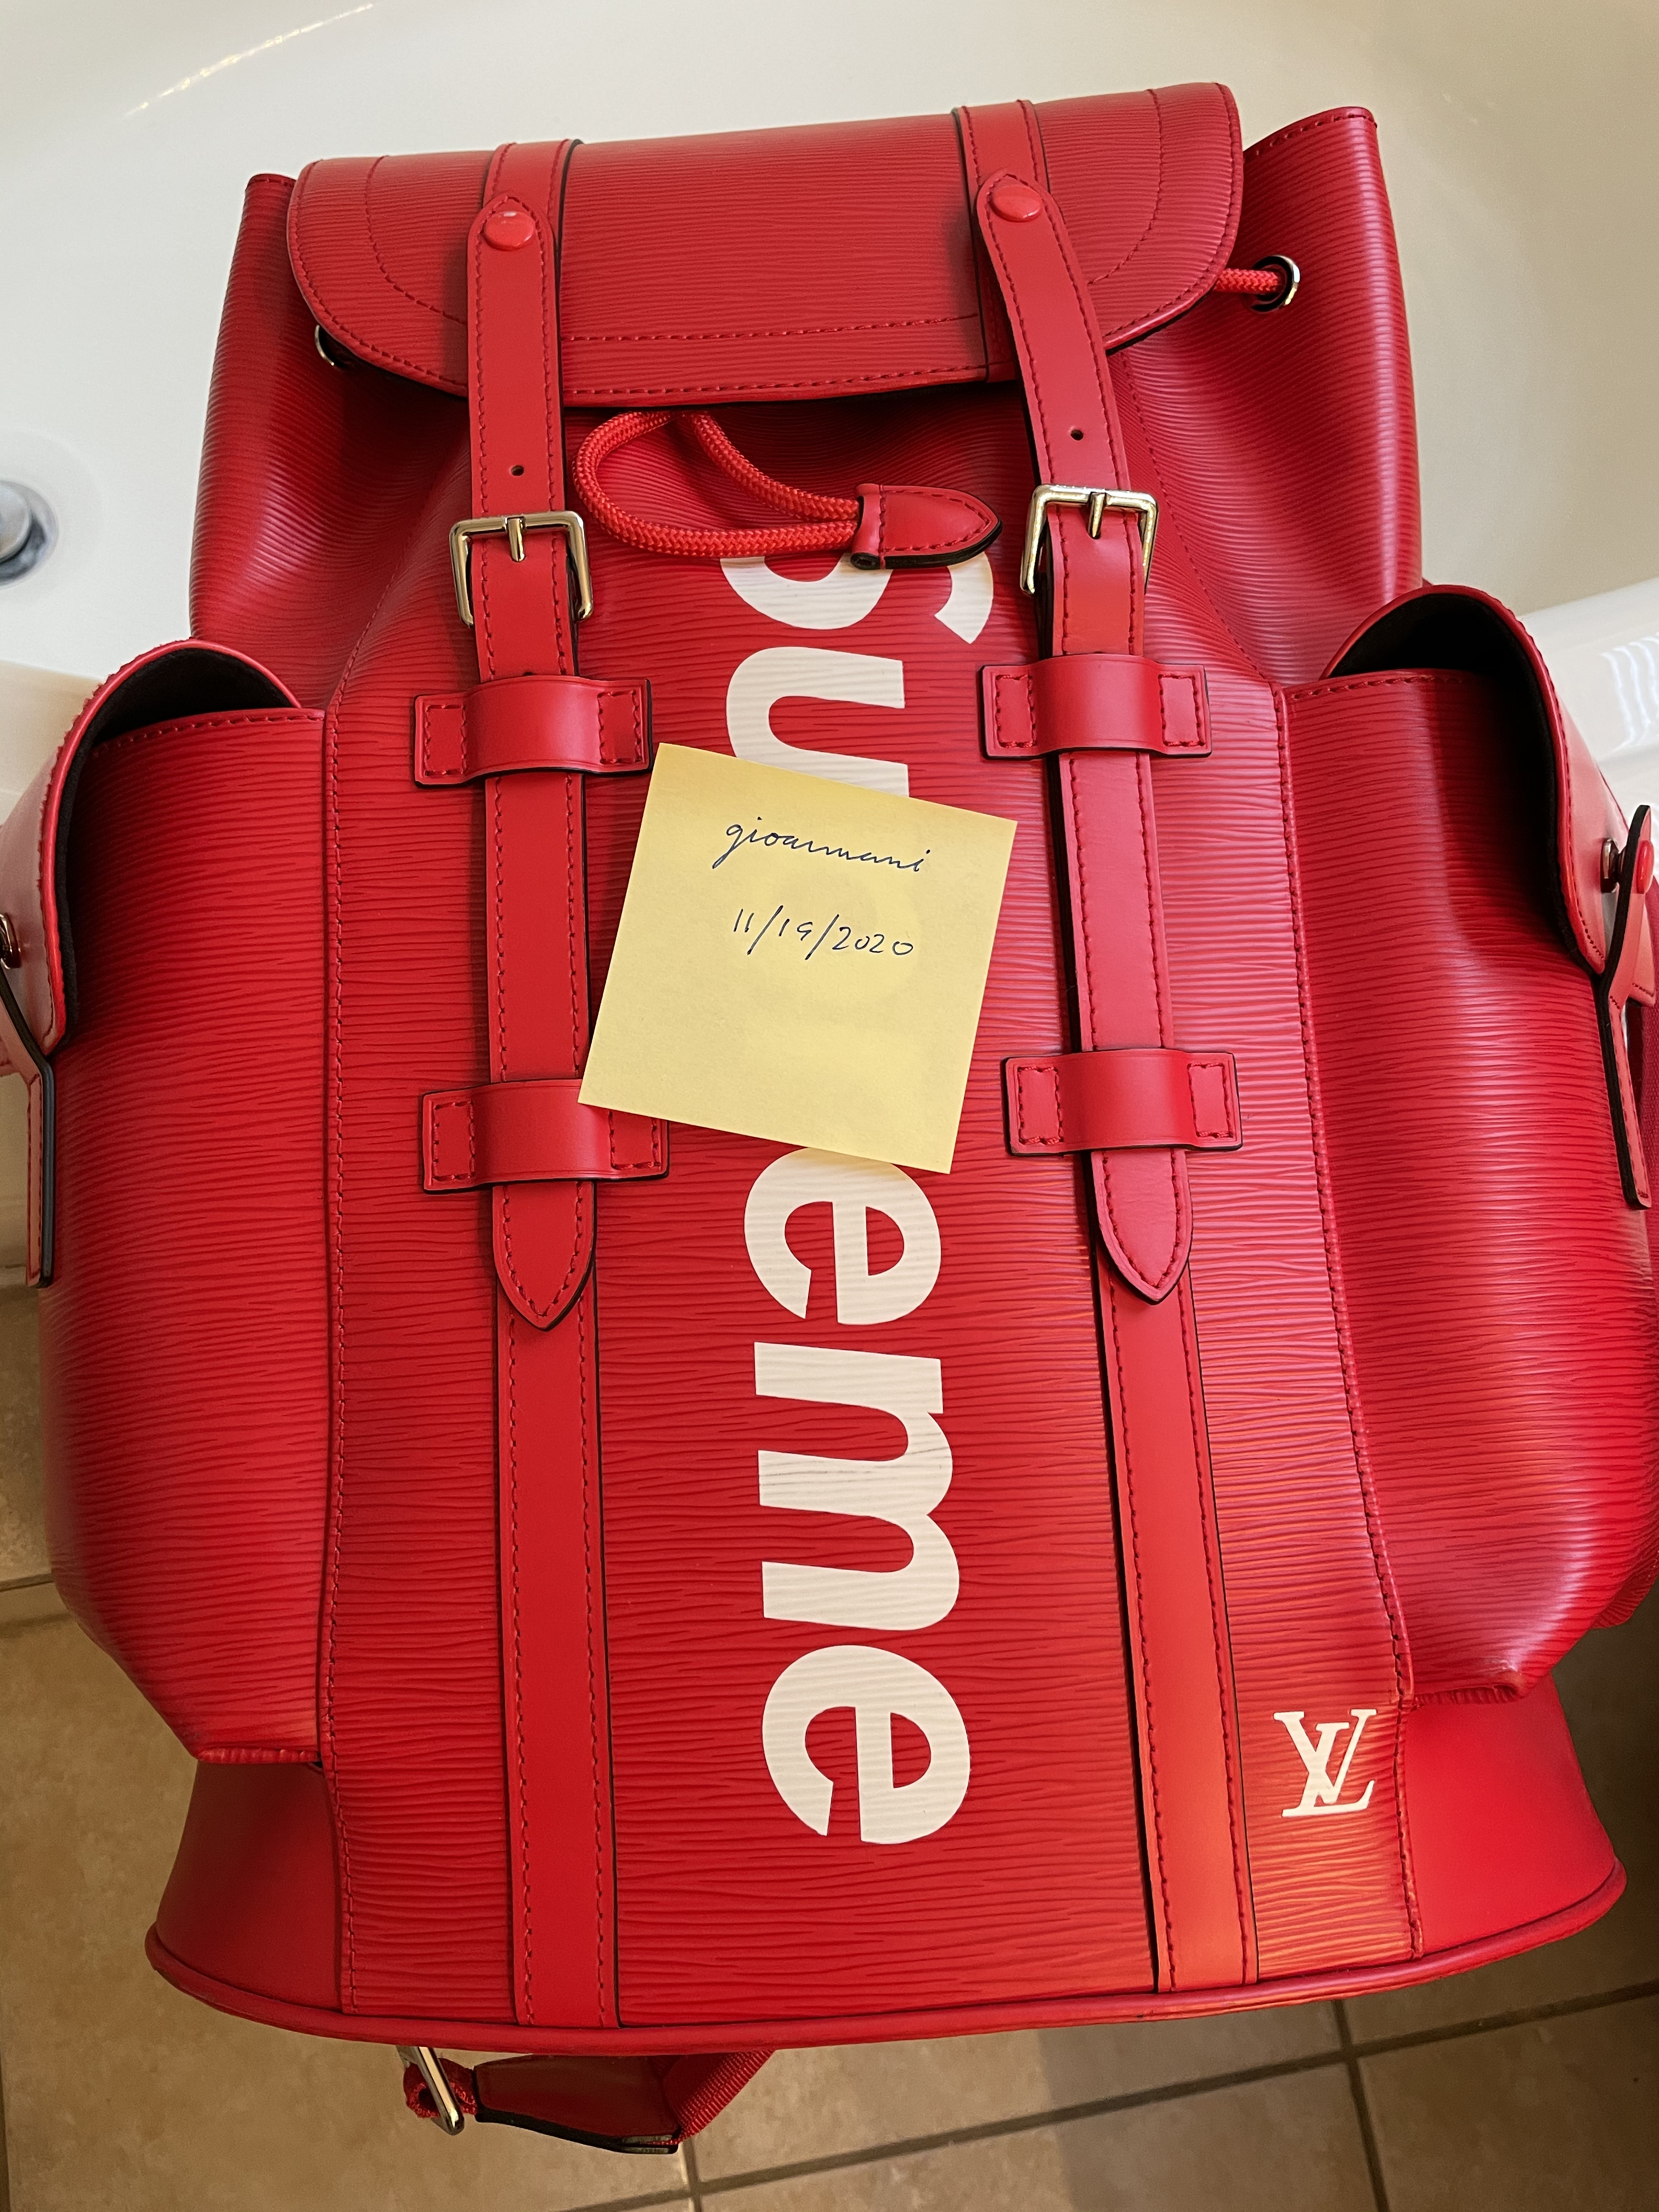 Is the Christopher Backpack worth purchasing? : r/Louisvuitton